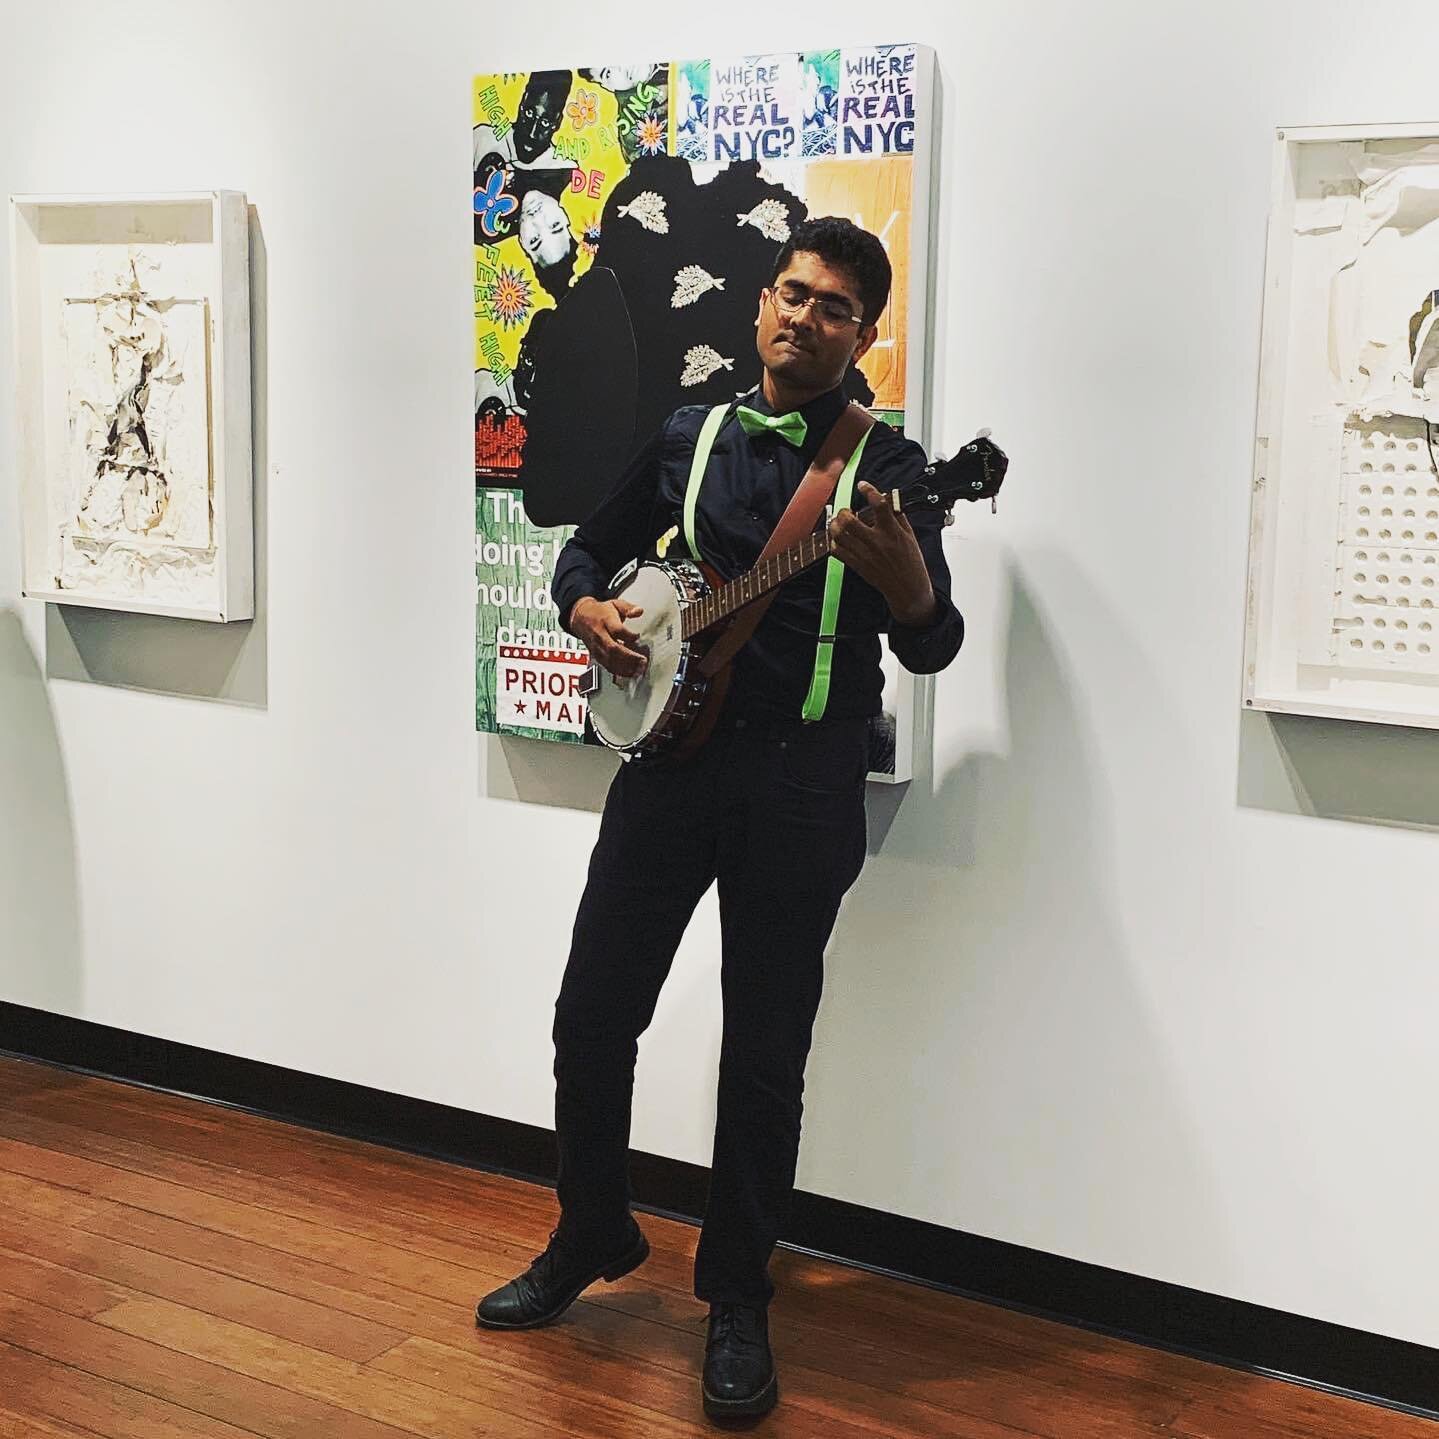 As if our flute candidate Rama wasn&rsquo;t already cool enough, he will also be playing banjo at his solo show TONIGHT! Ticketing in bio! #pnme #flute #banjo #pittsburgh #summer2022